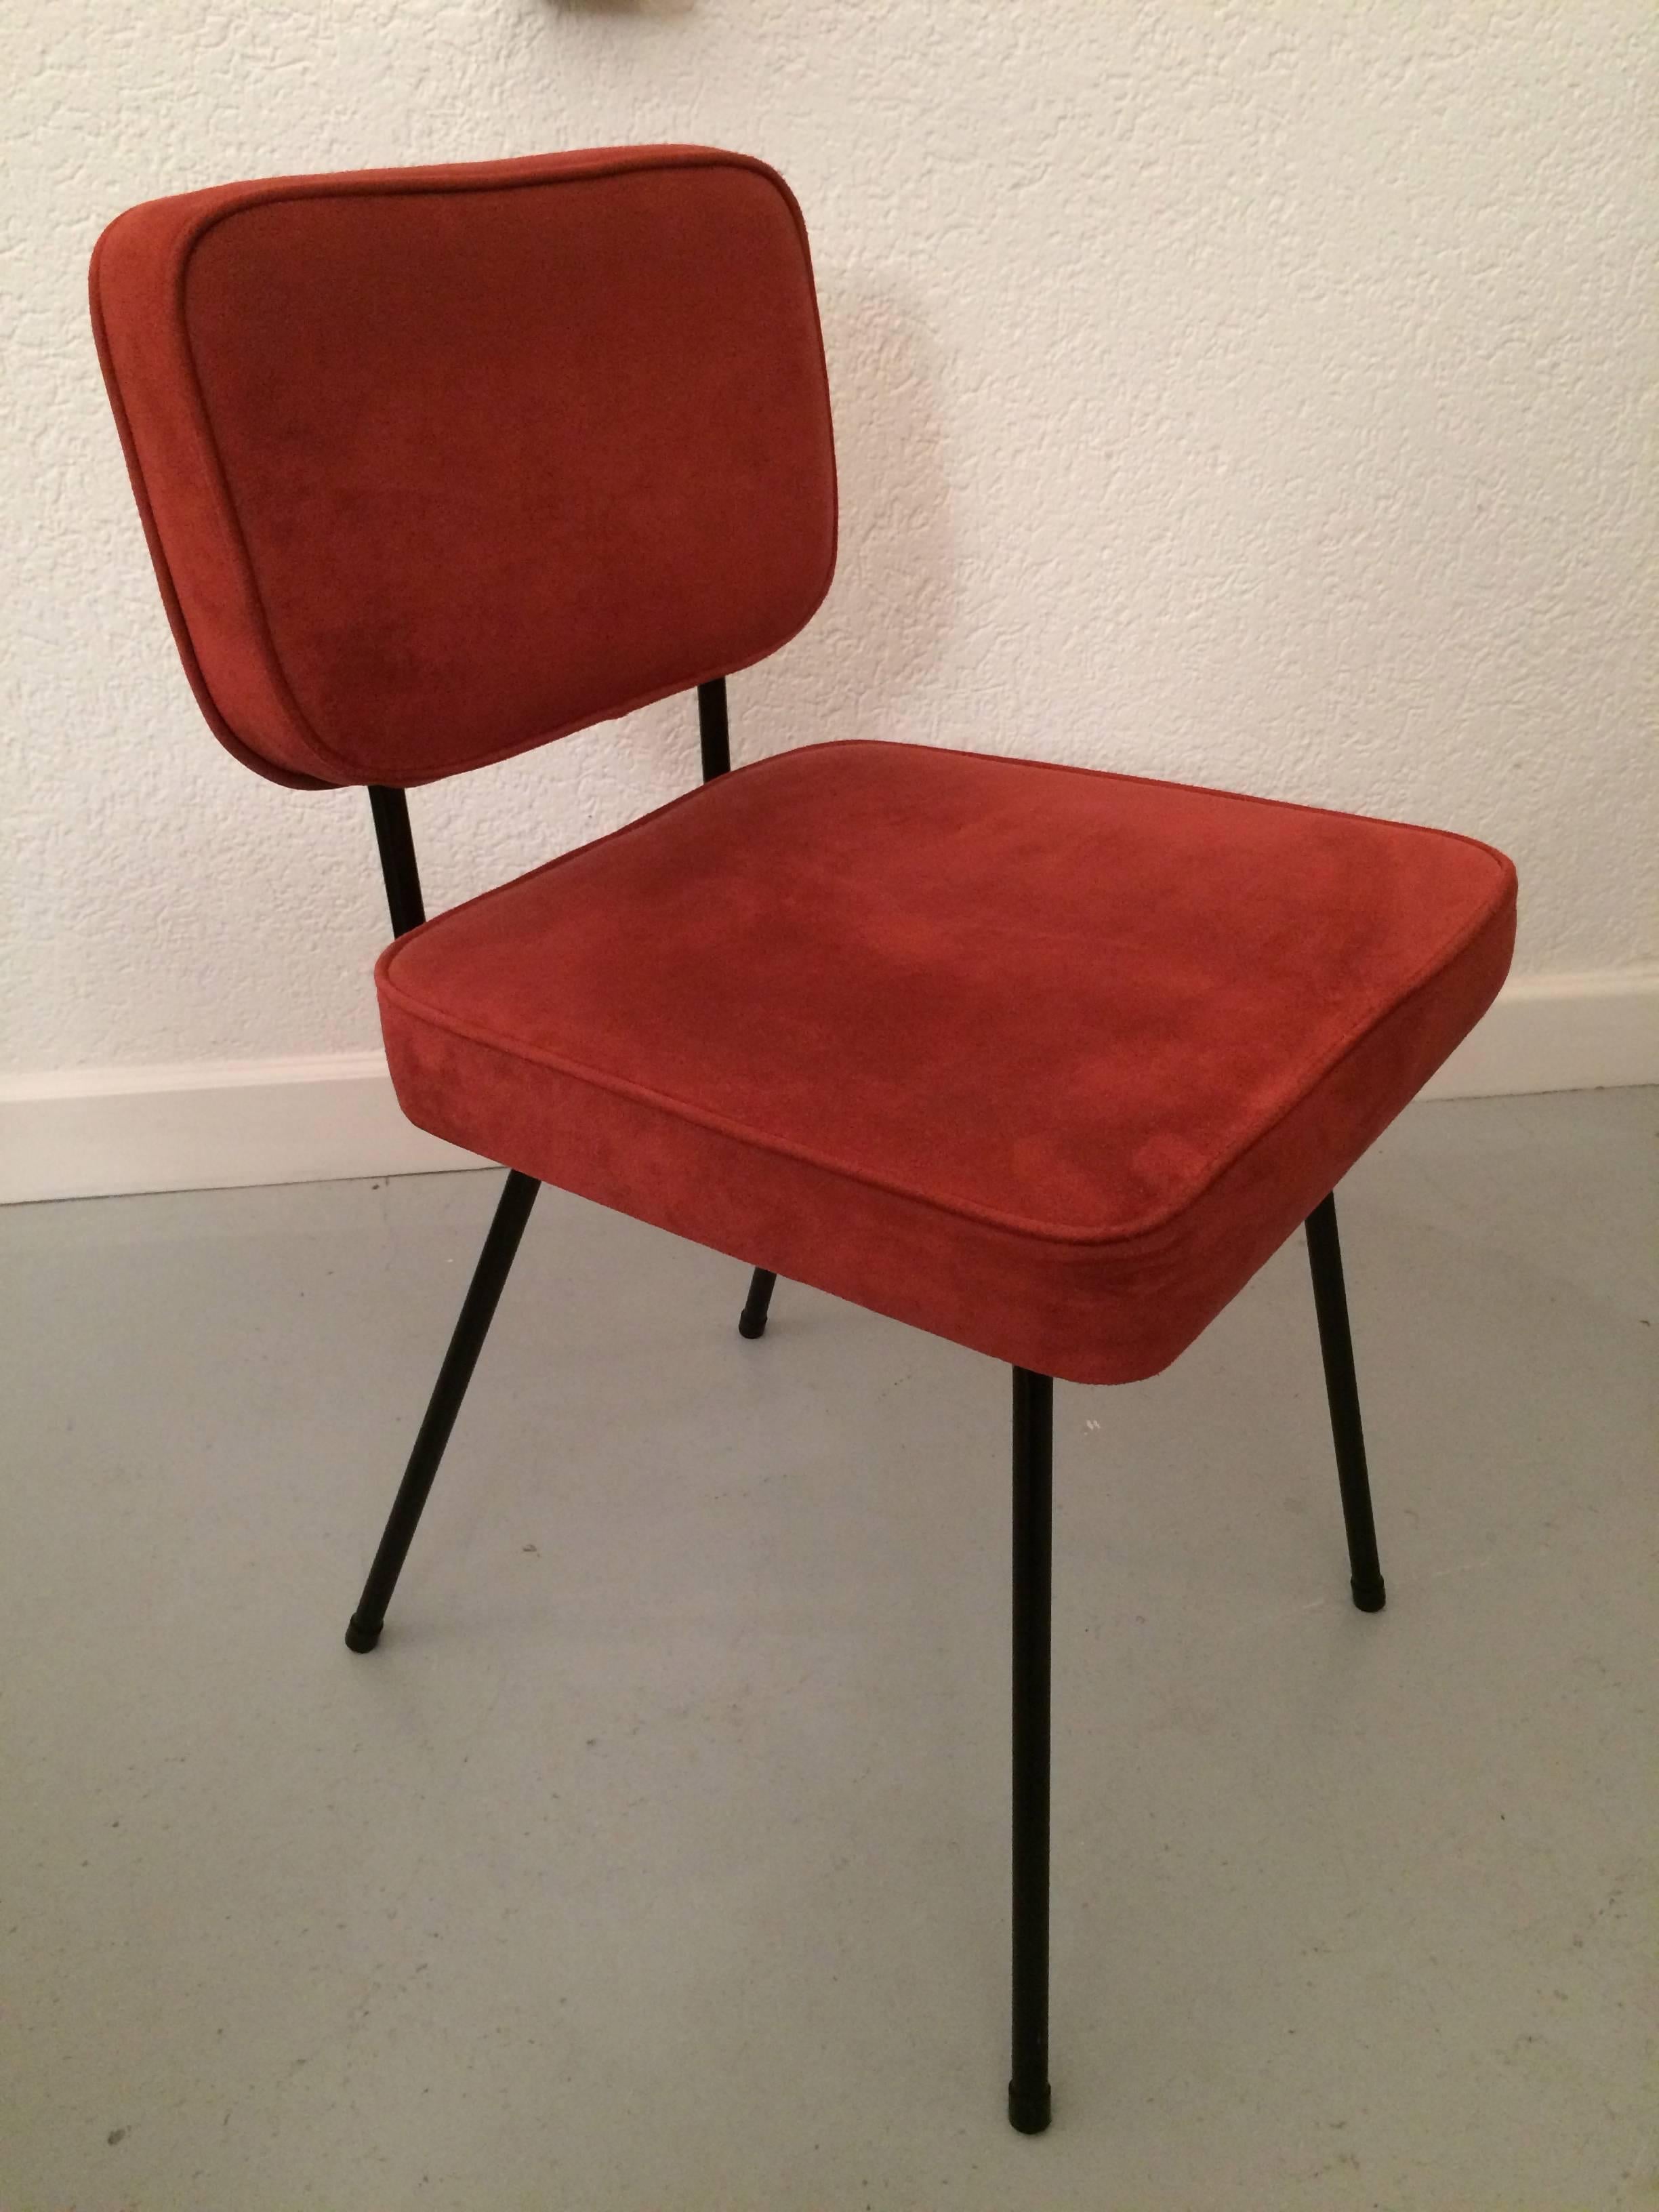 Set of four alcantara dining chairs by André Simard for Airborne circa 1955.
Reupholstered in red alcantara.